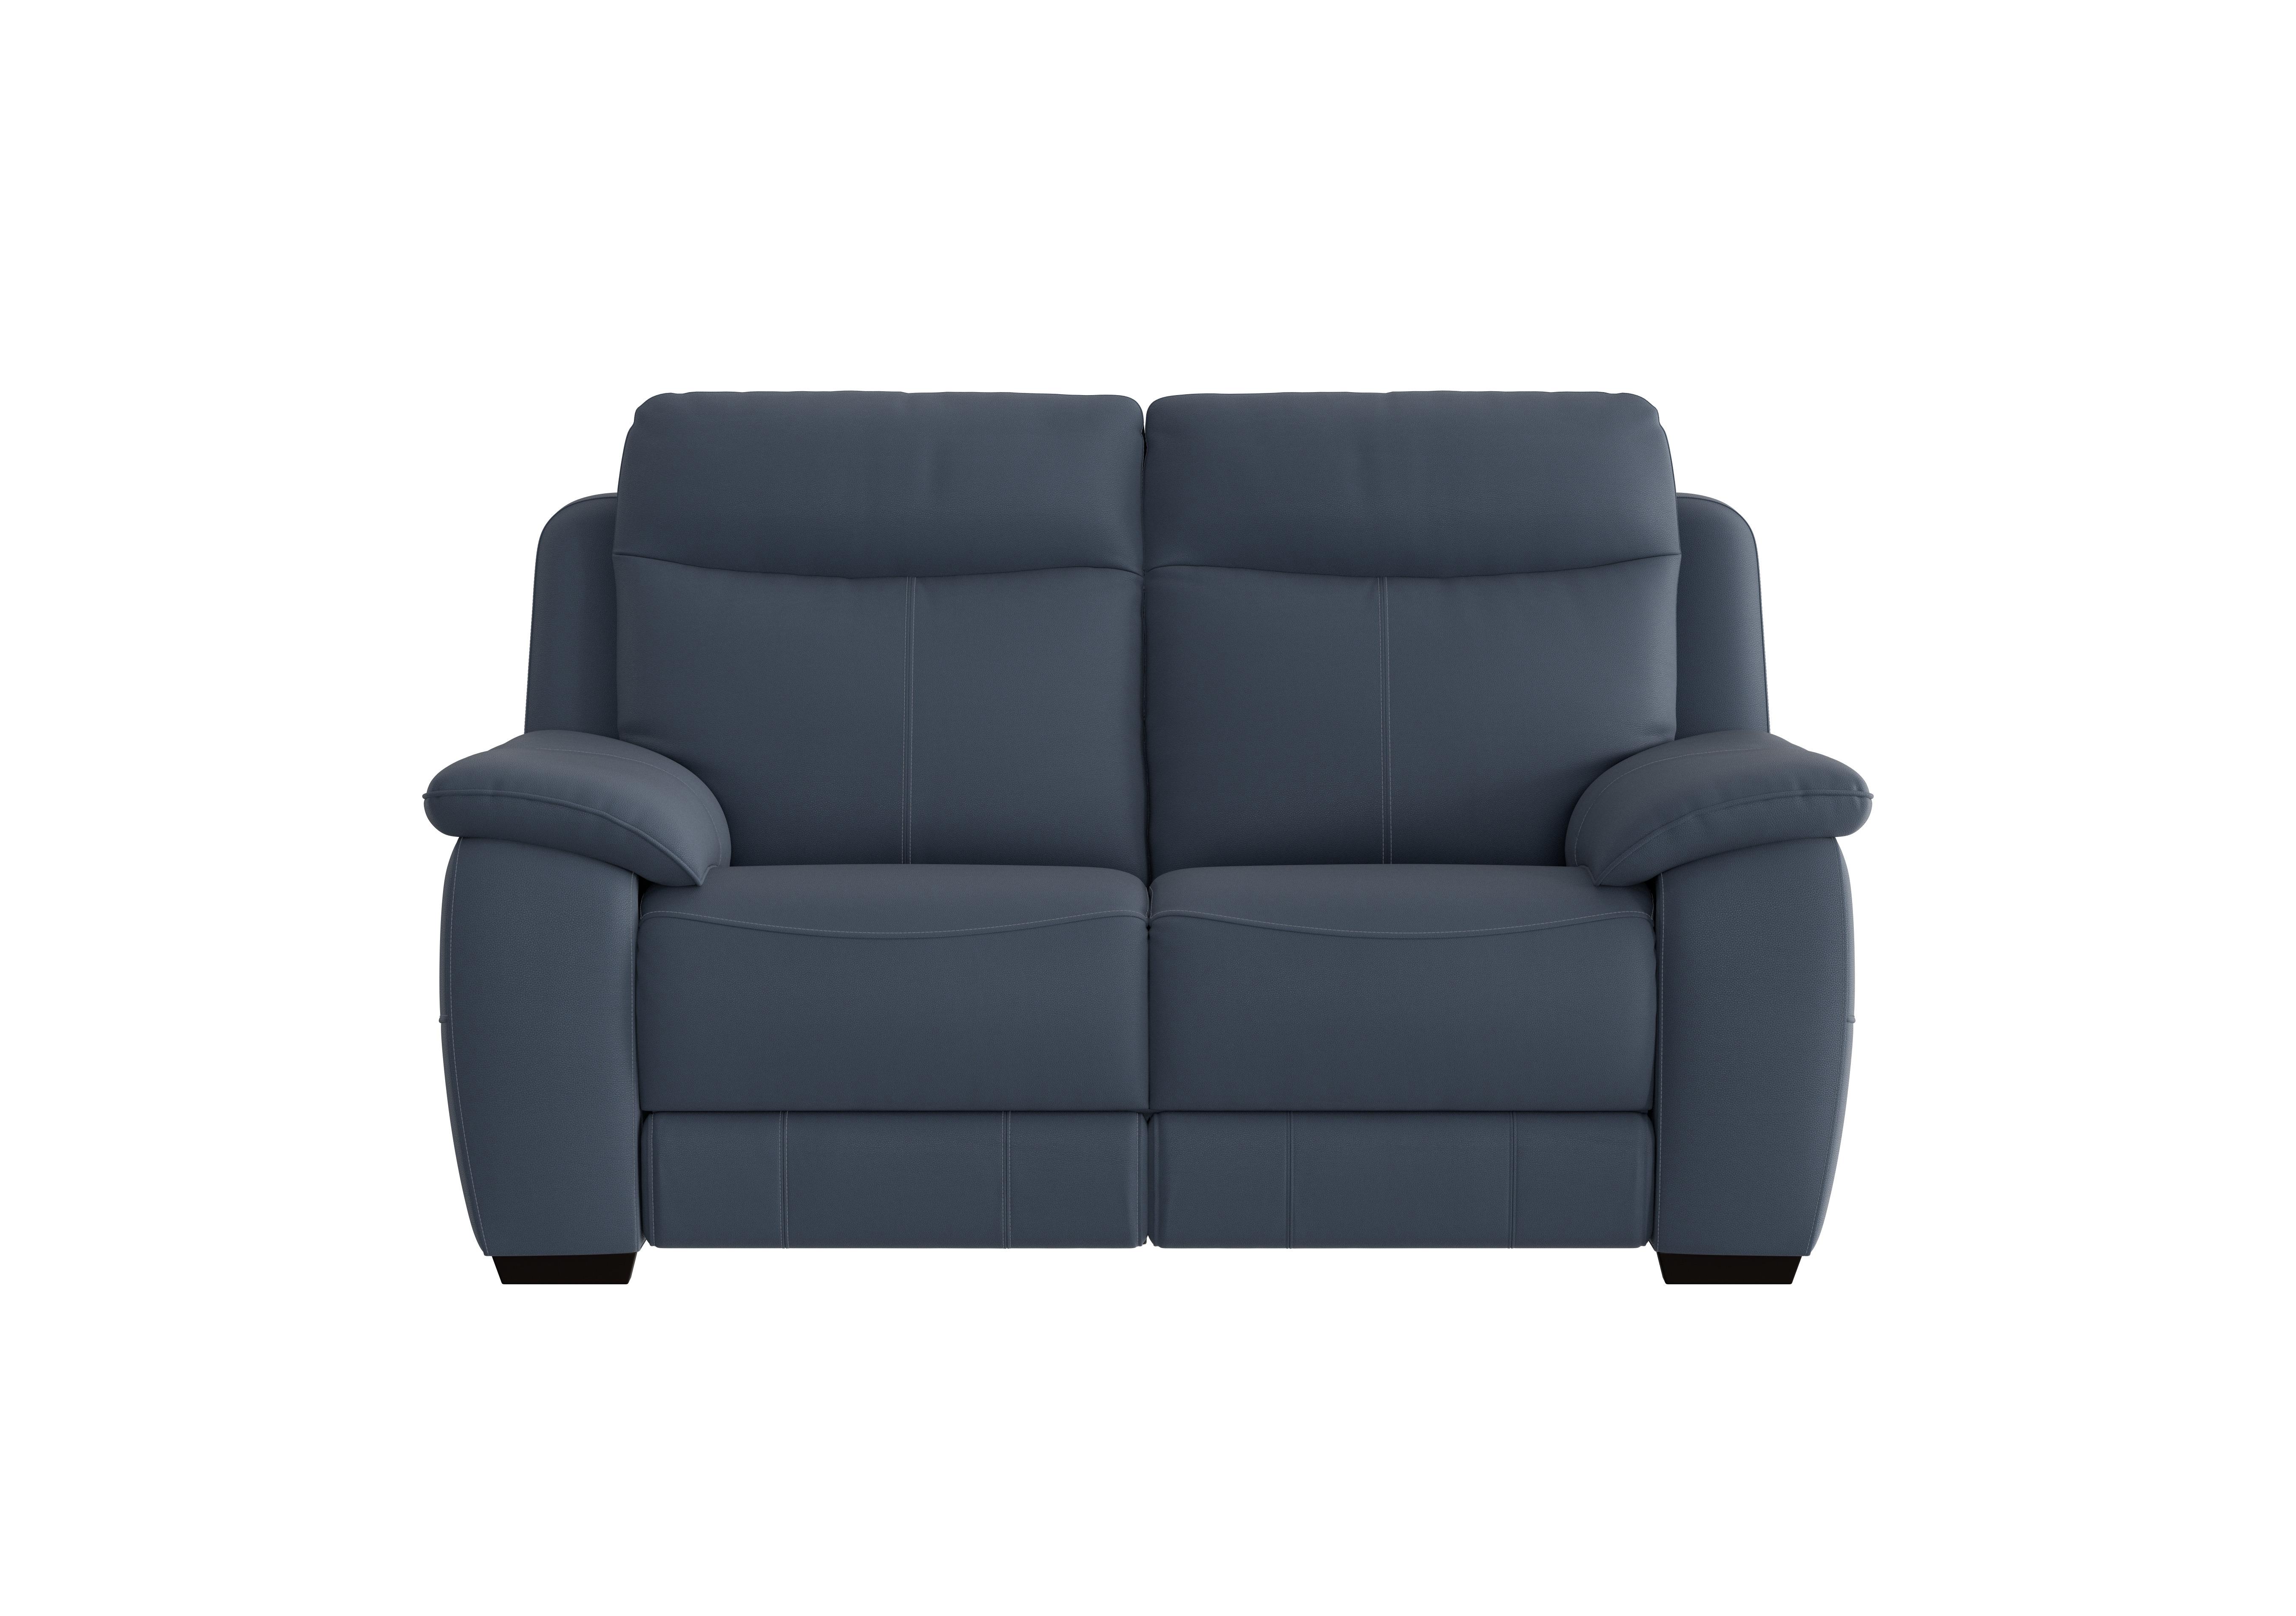 Starlight Express 2 Seater Leather Recliner Sofa with Power Headrests in Bv-313e Ocean Blue on Furniture Village